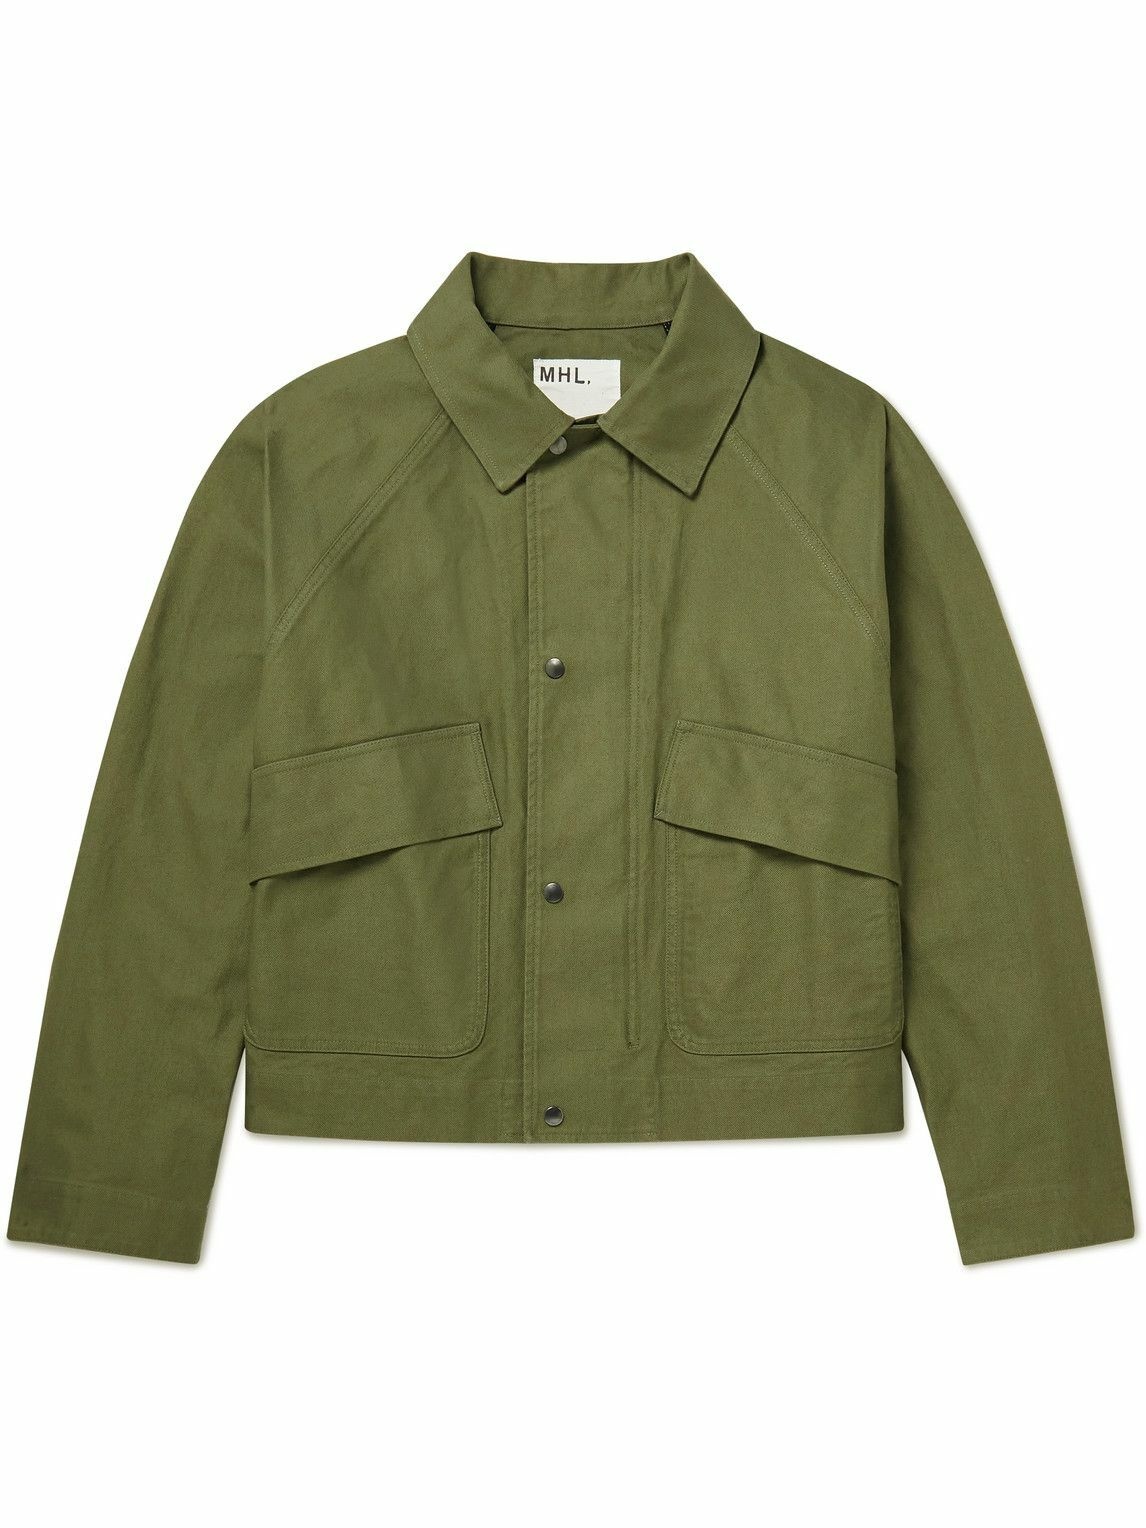 Photo: Margaret Howell - MHL Cotton-Drill Jacket - Green